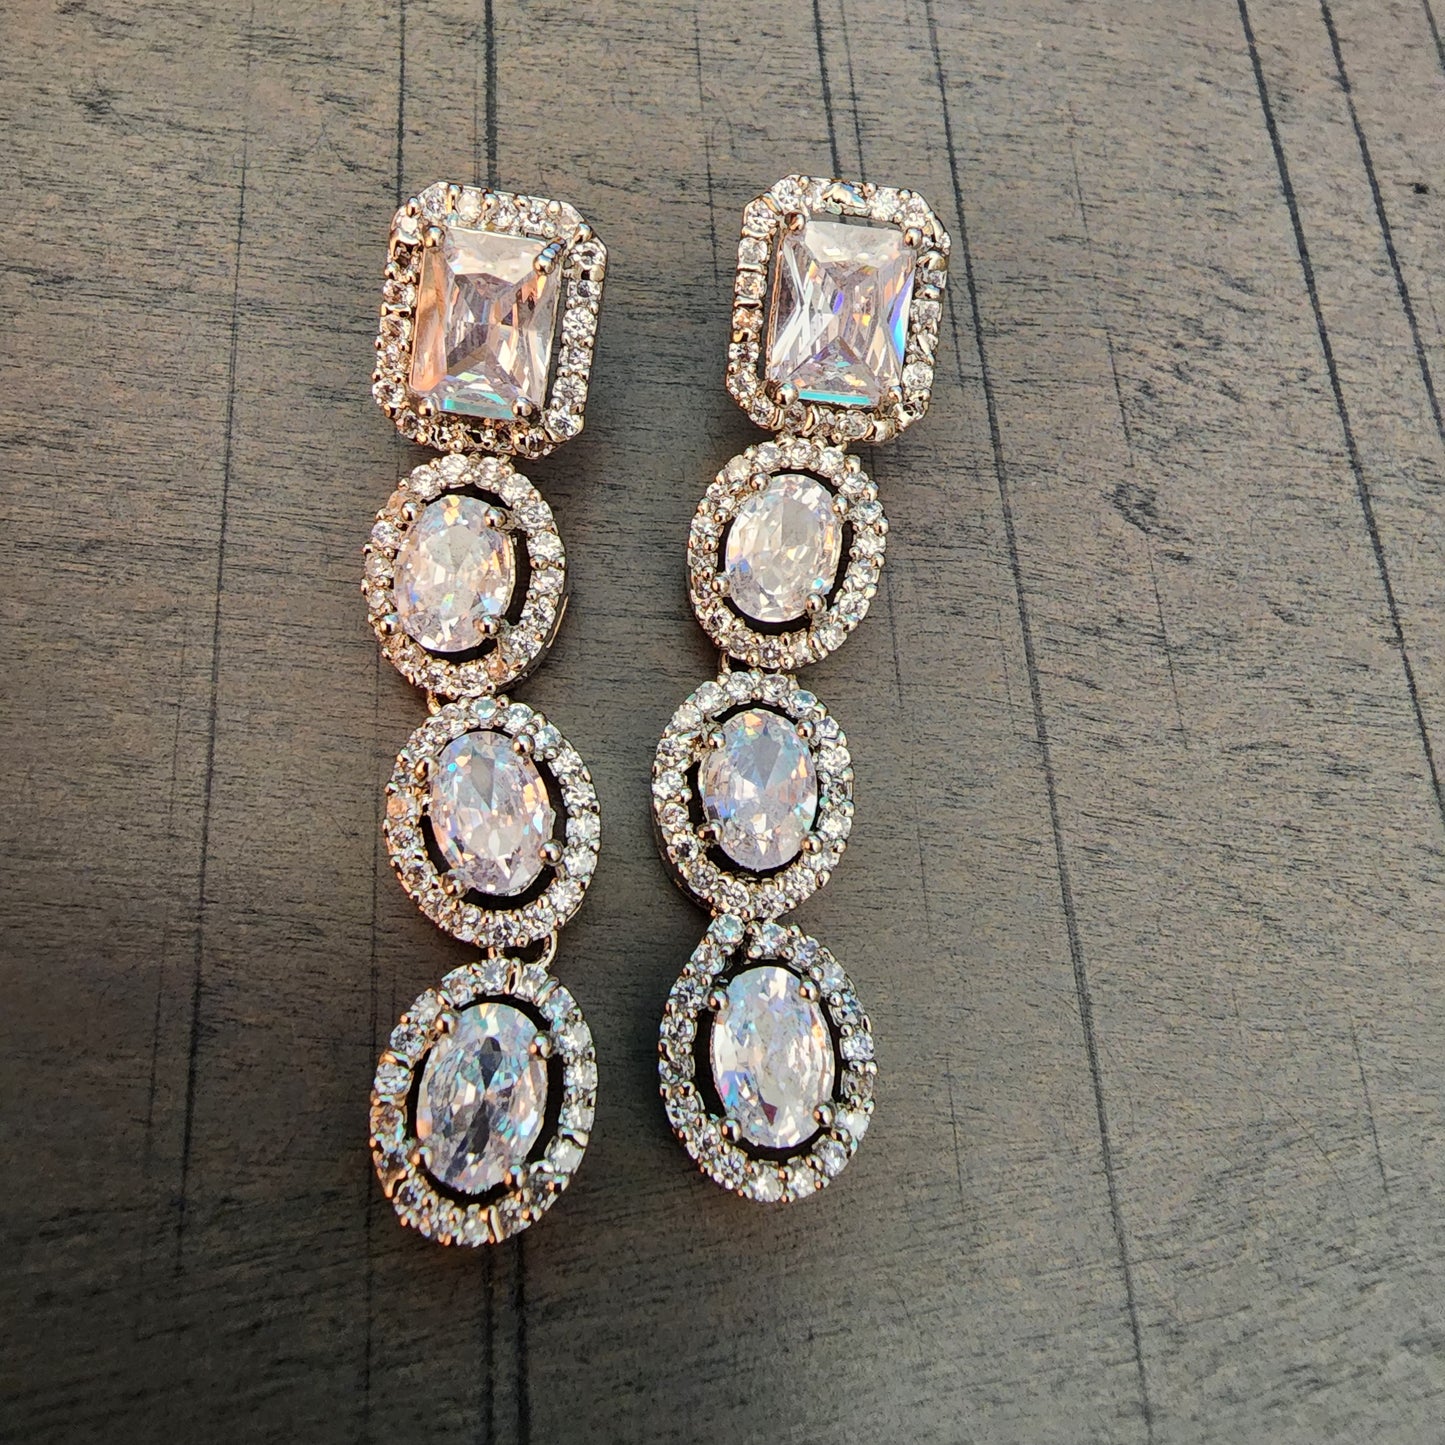 Two Layered American Diamond Necklace and Earrings